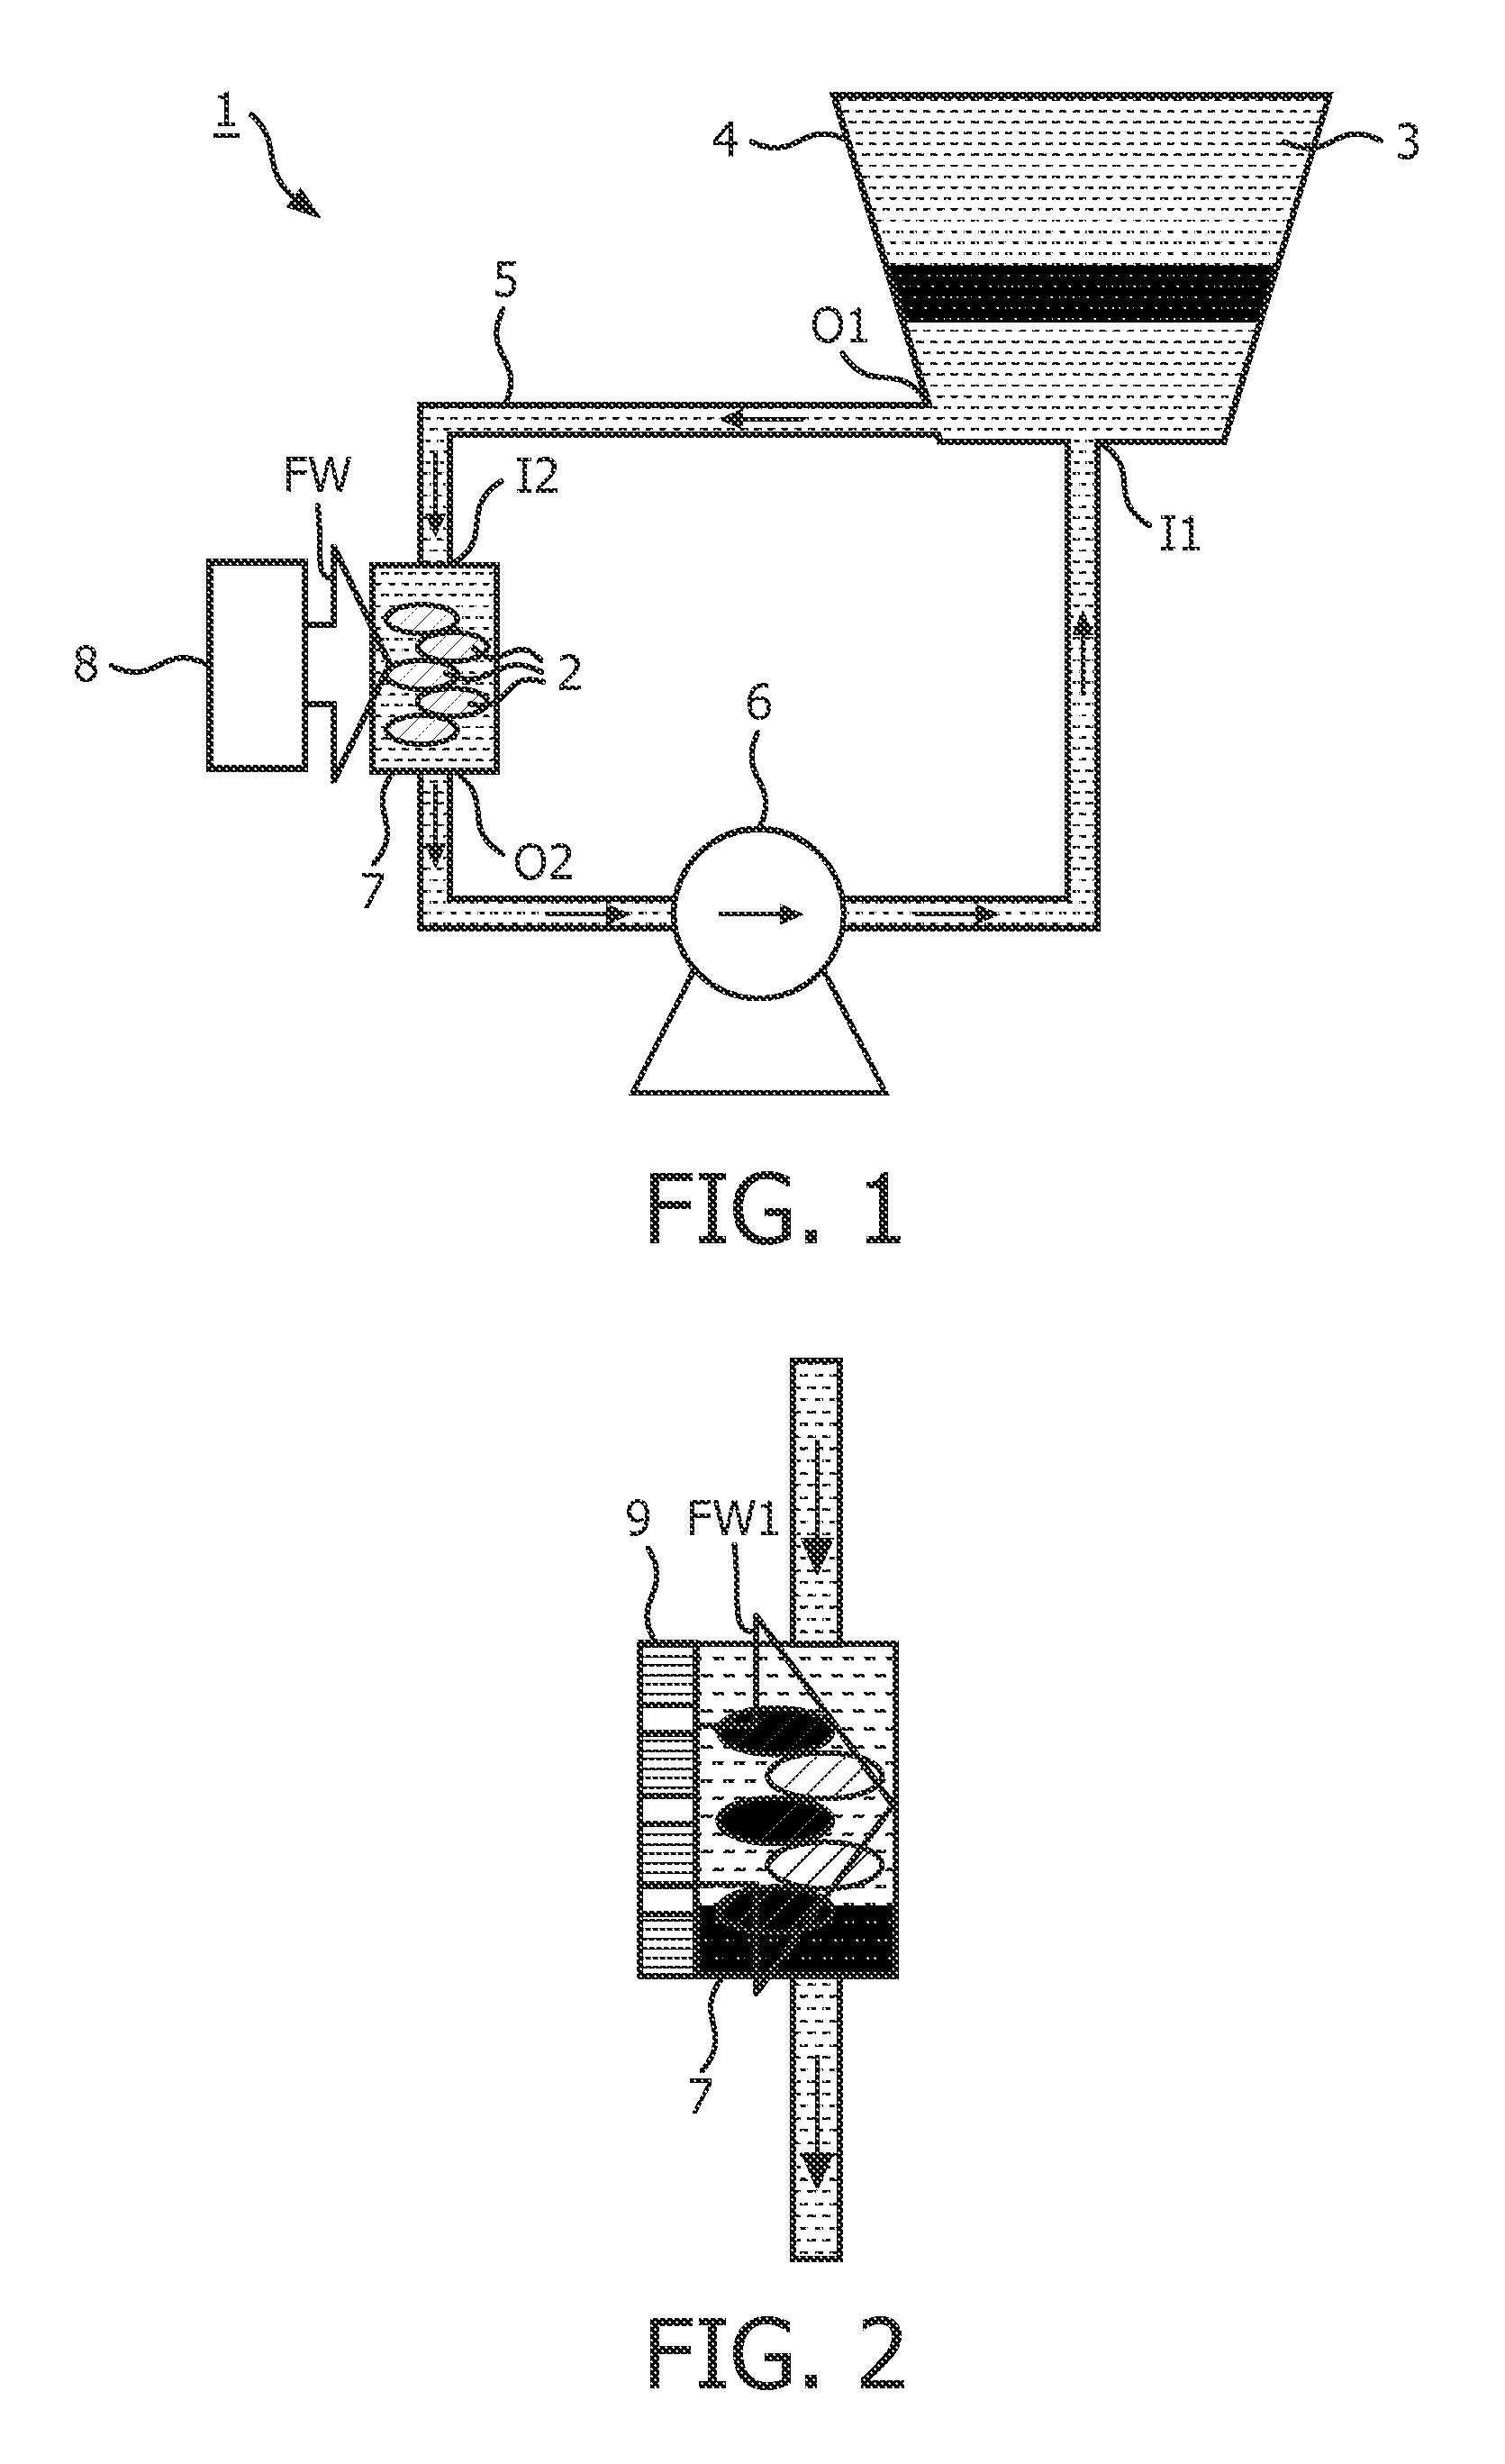 Method and apparatus for decocting ingredients in a solvent